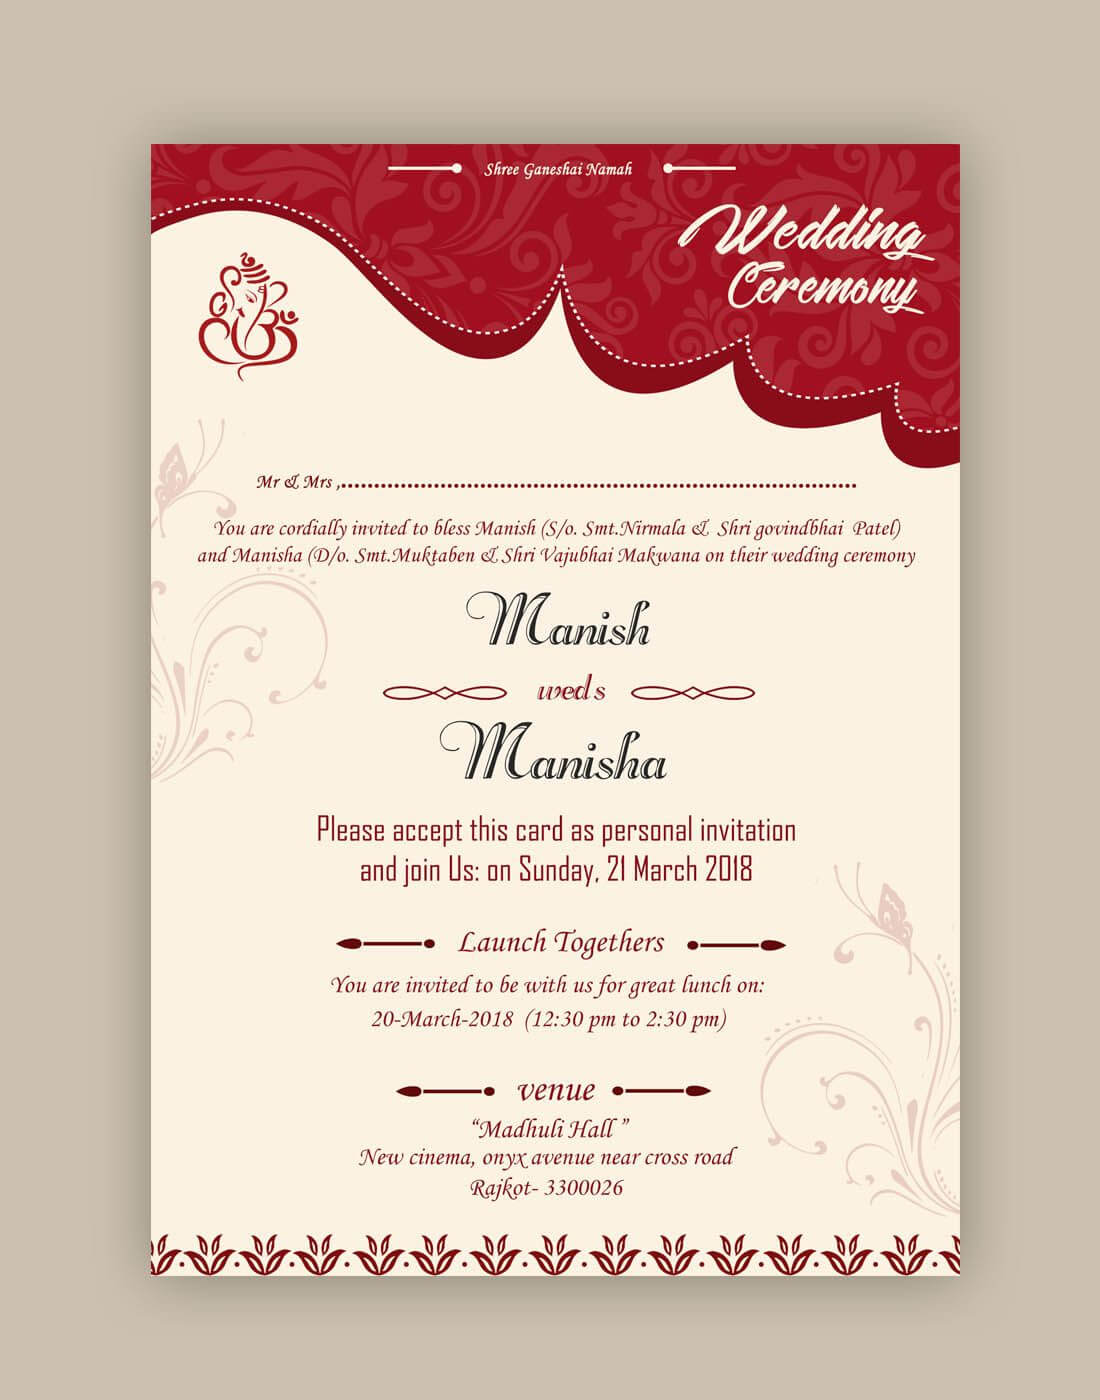 Free Wedding Card Psd Templates In 2020 | Marriage Cards For Indian Wedding Cards Design Templates